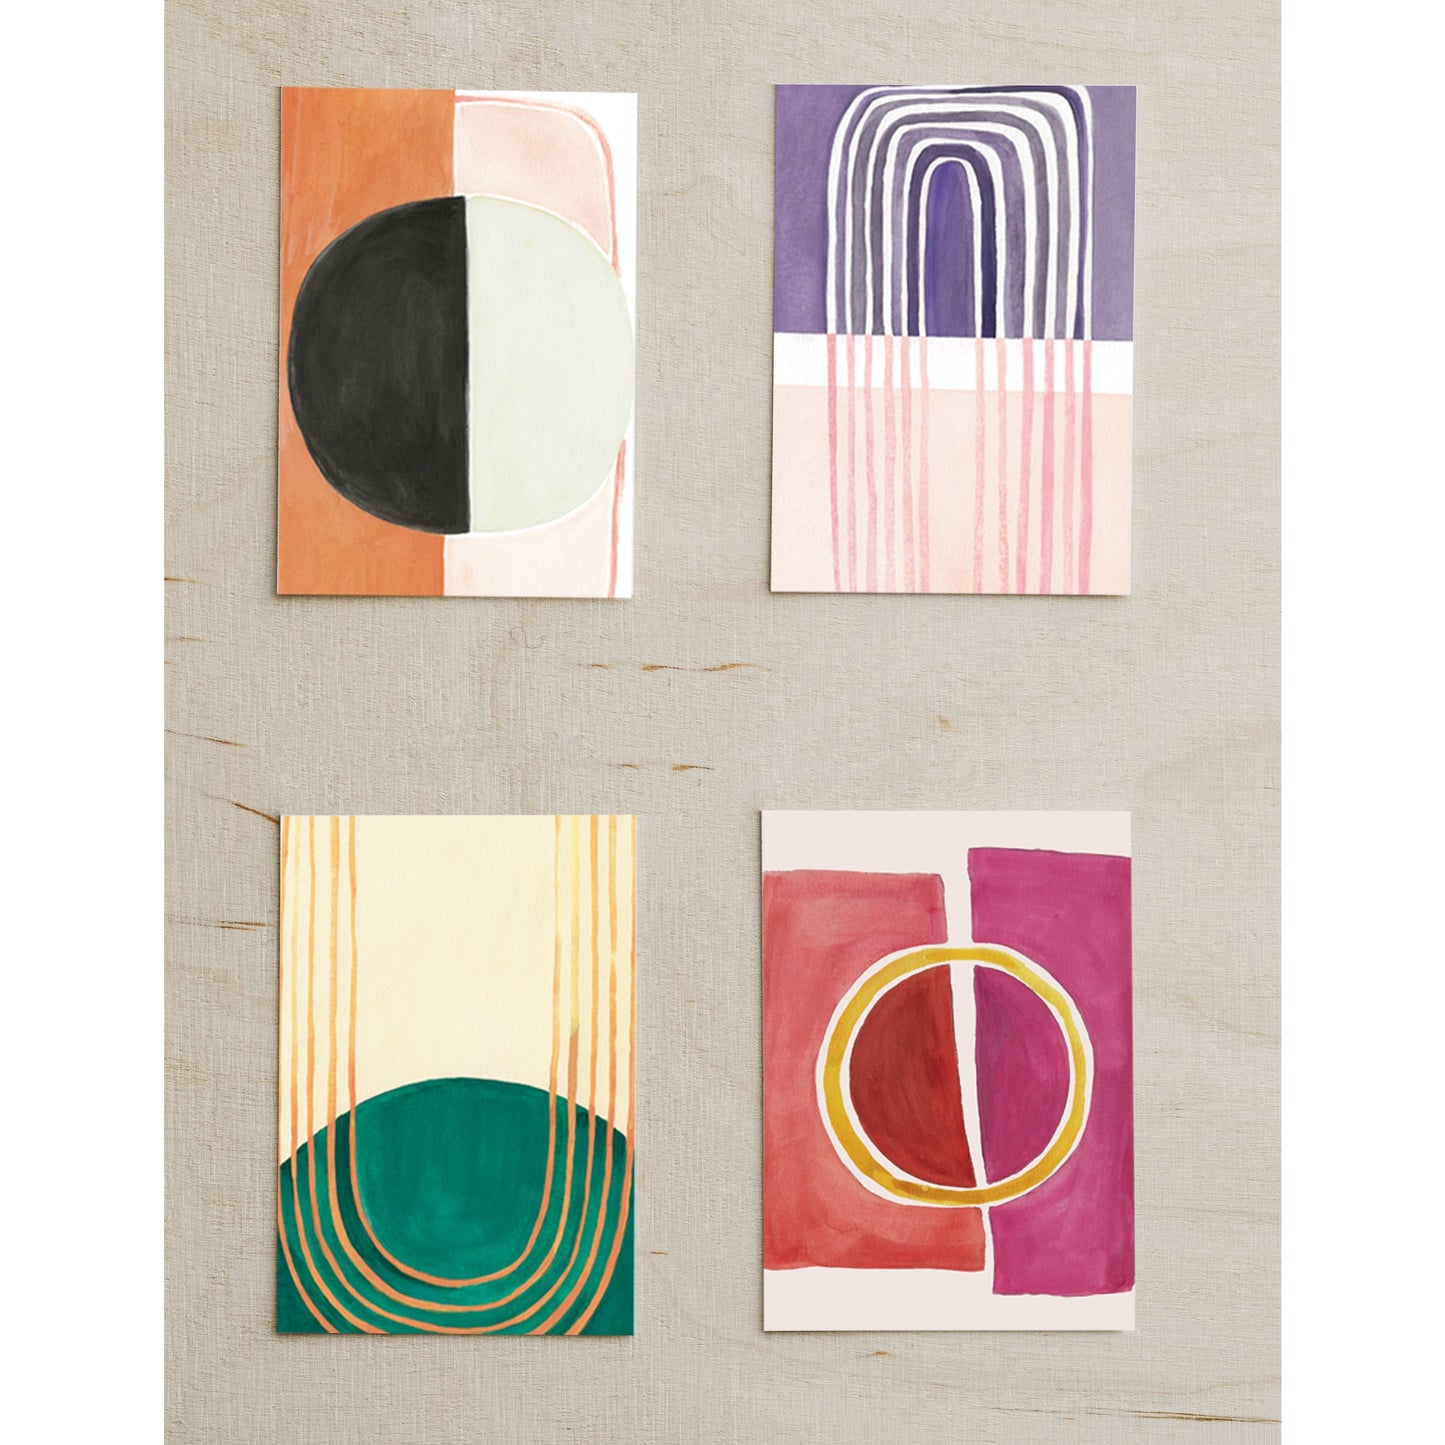 Set of 4 vibrant mid-century modern prints by Honora Papers, perfect for refreshing any home decor.